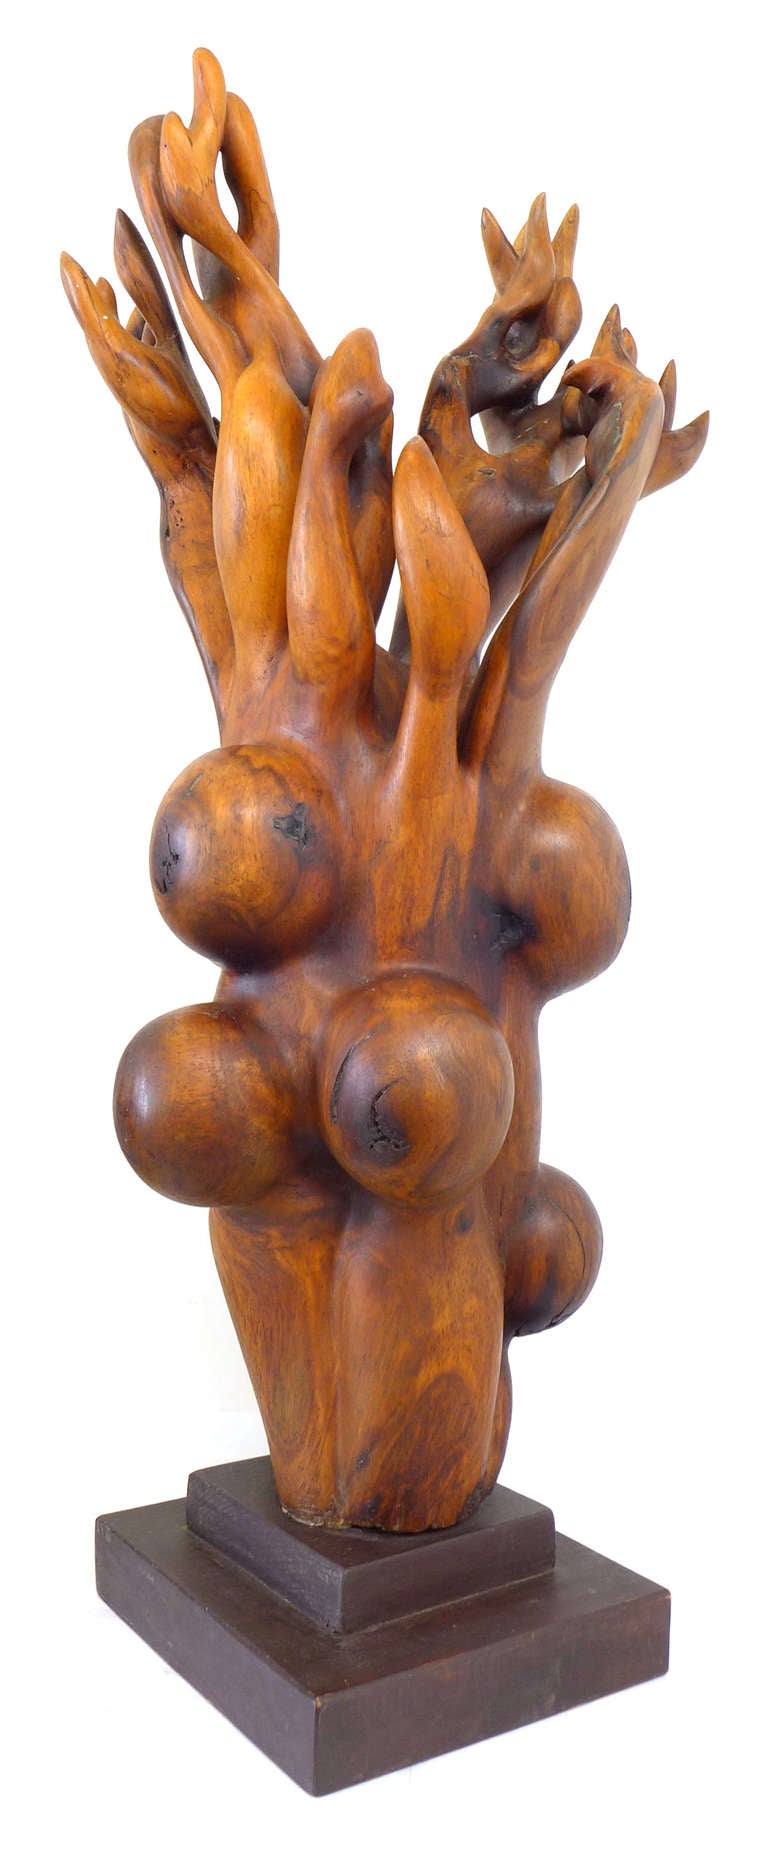 A striking carved-wood sculpture by New York artist Robin Spry Campbell (1922 - 2012). Campbell attended Skidmore College, studying arts education before joining the US Army in 1943, where her artistic talents were put to use for weapon design - an